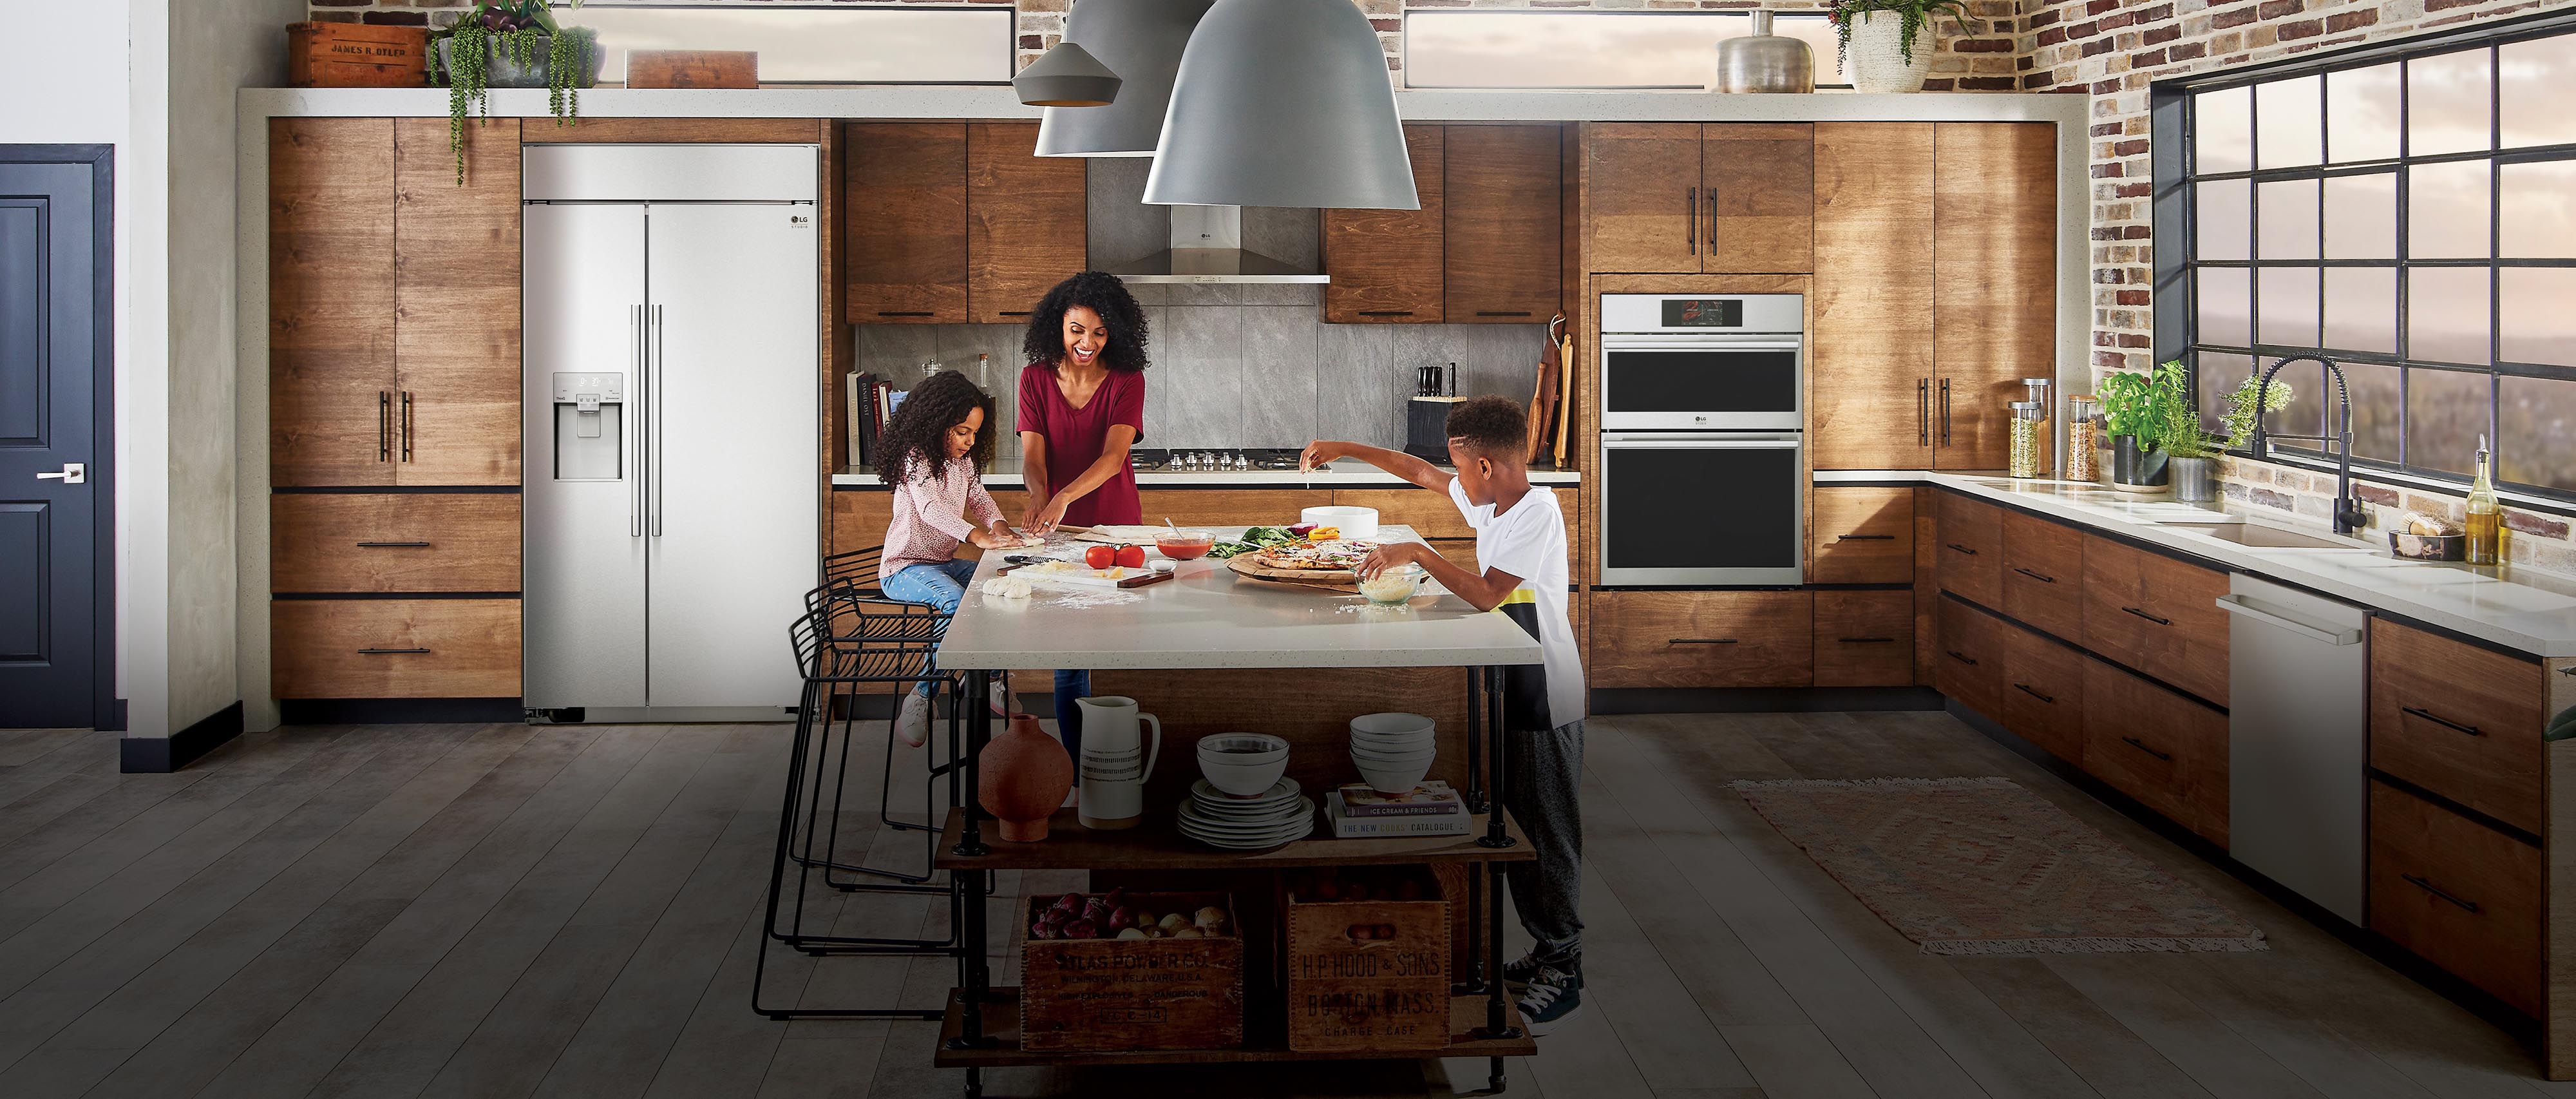 LG Home Appliance Promotions